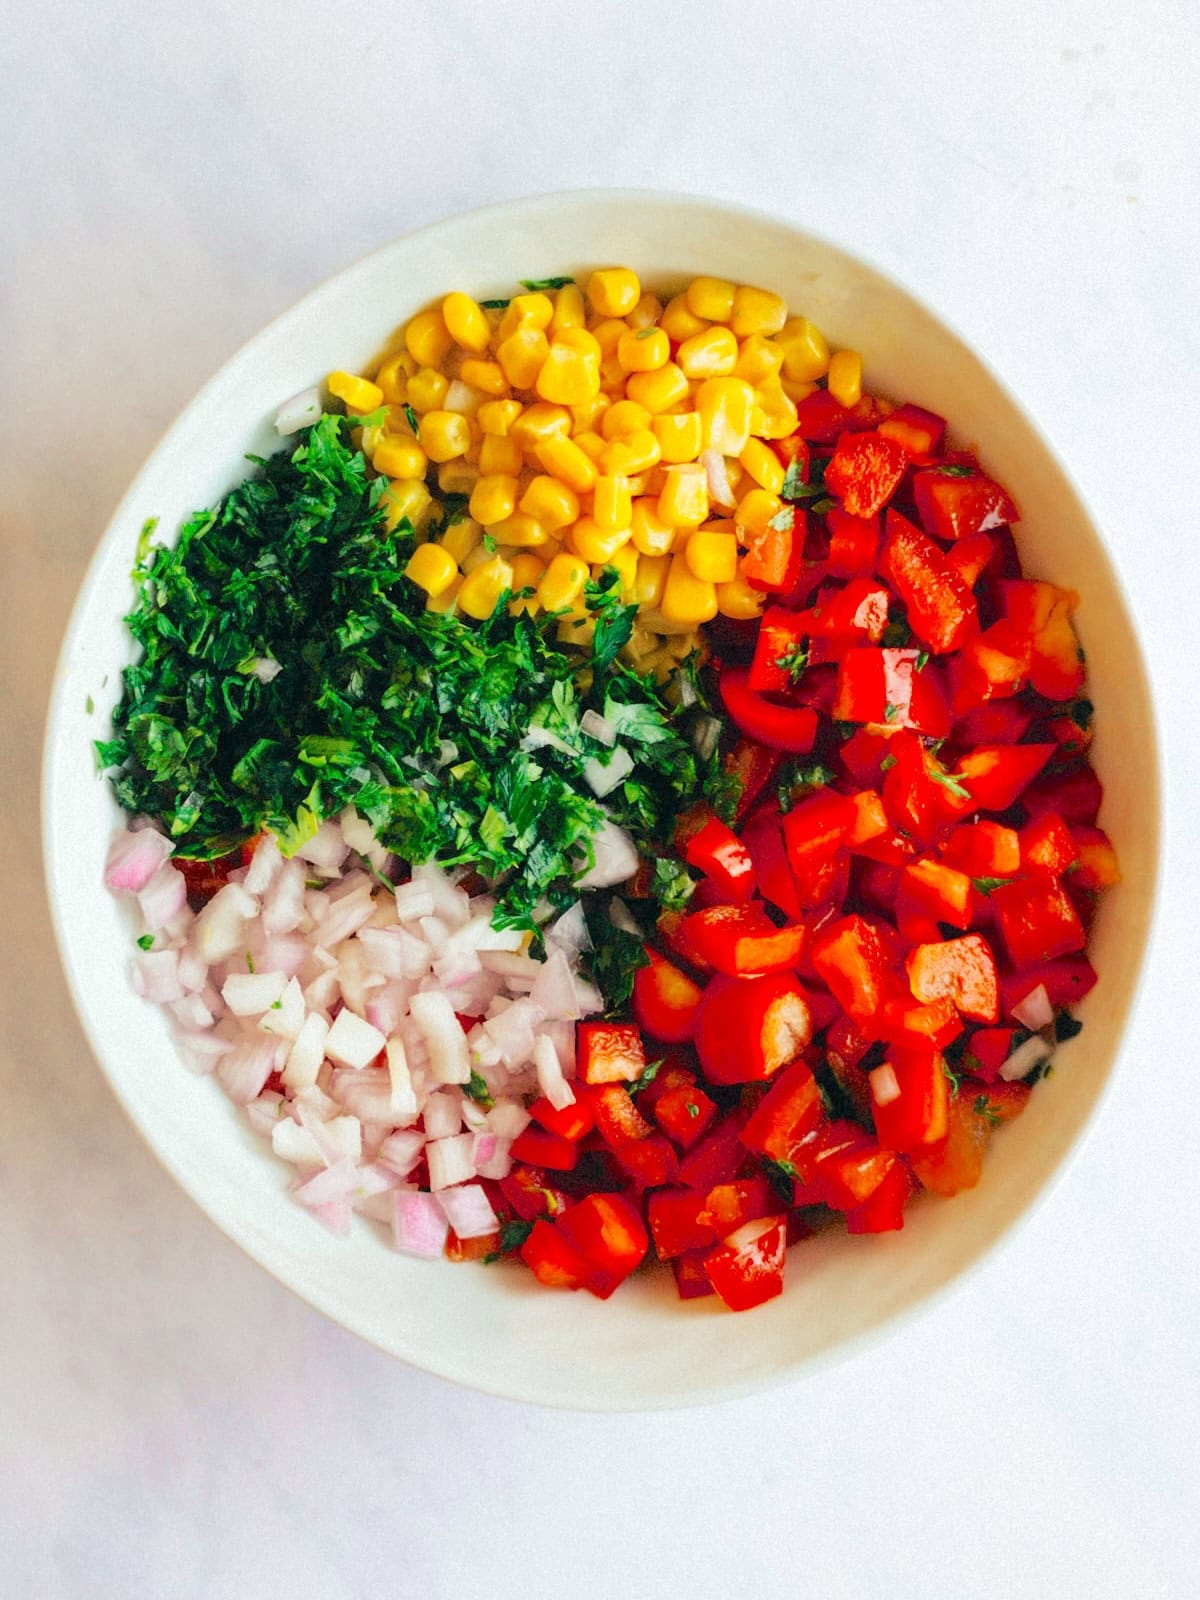 A bowl with the ingredients need to make corn salsa; diced peppers, red onion, corn, cilantro, and tomatoes.